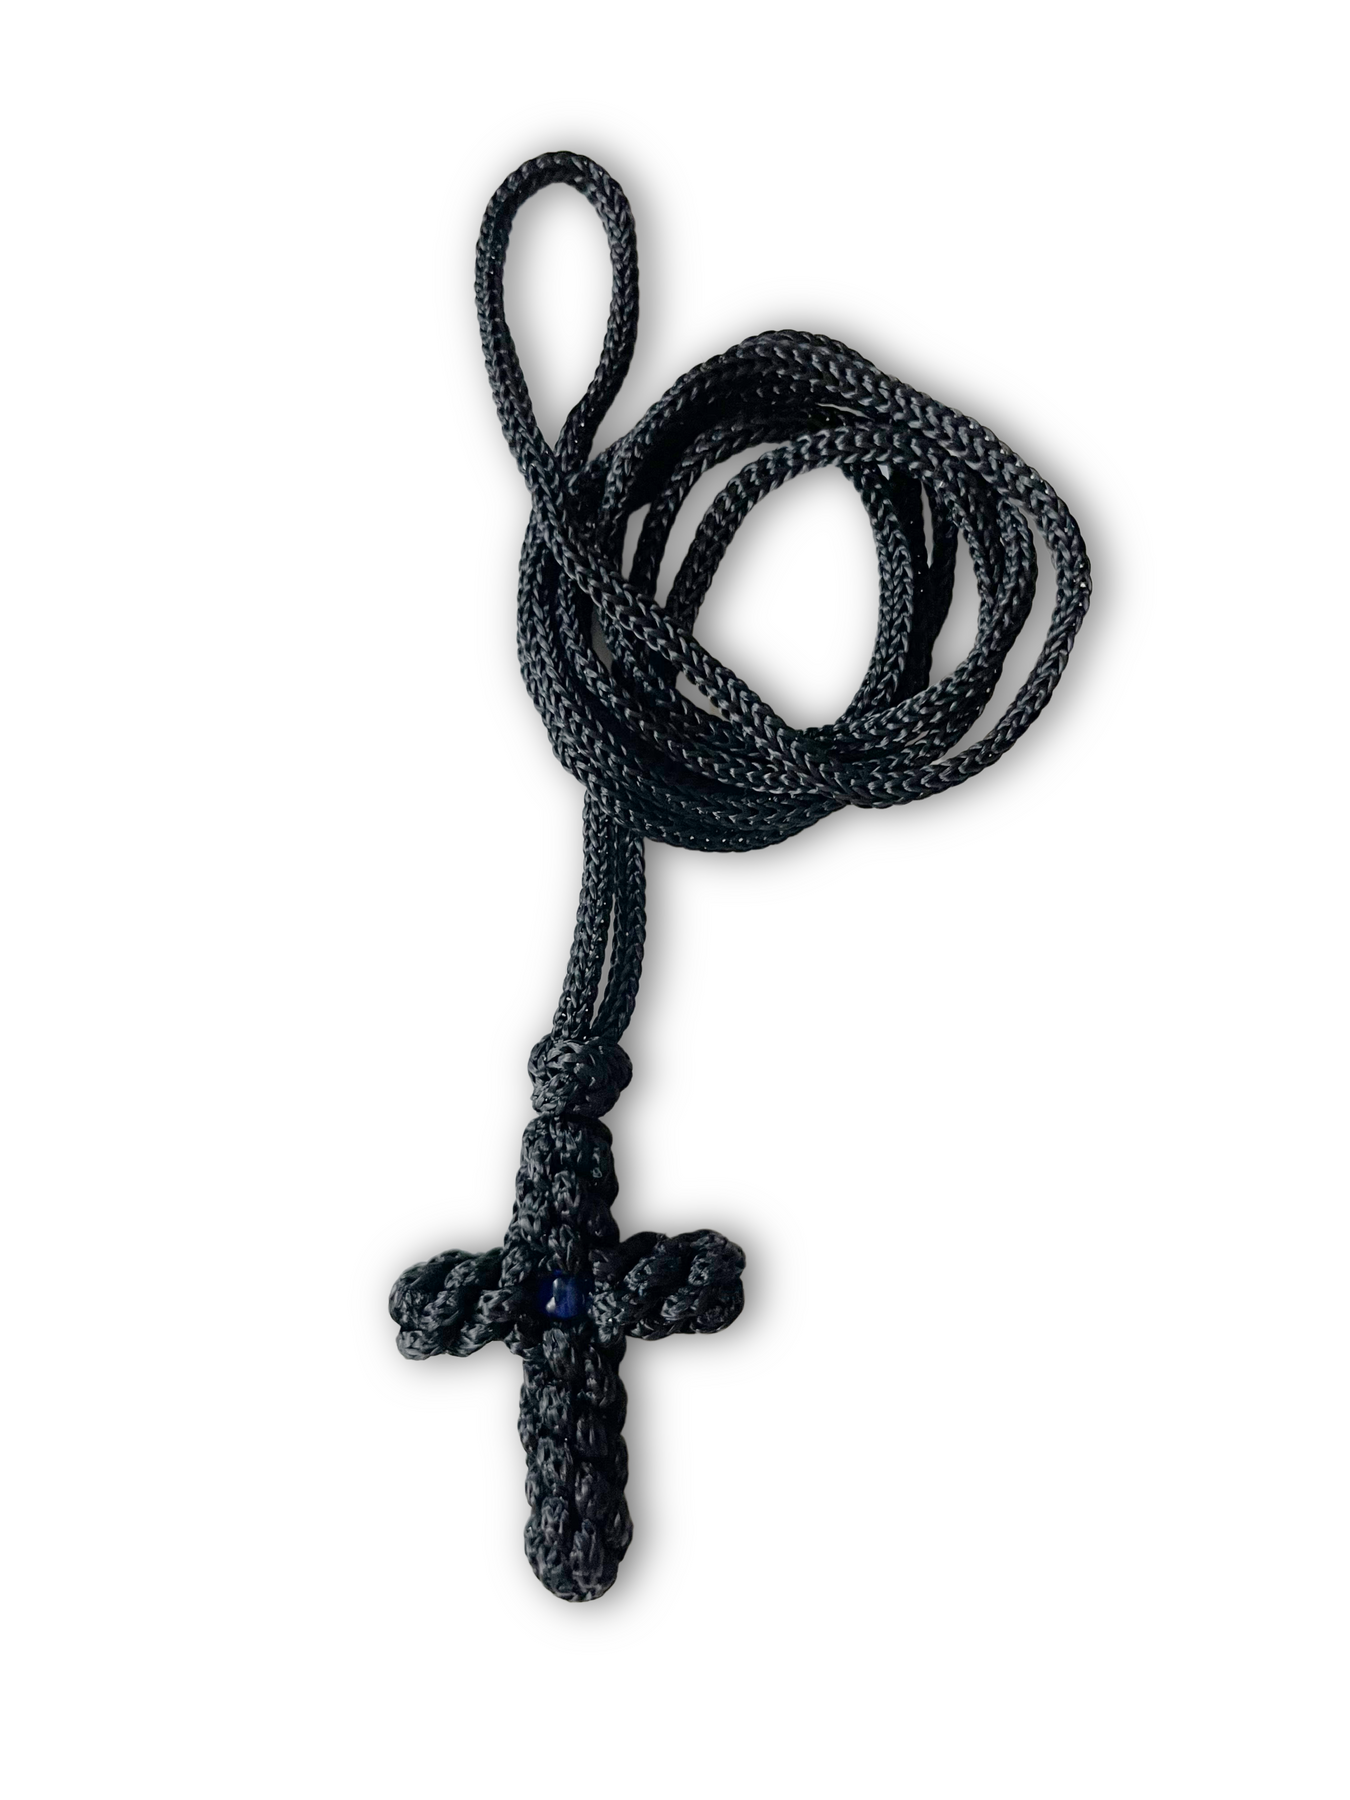 Knot Cross, with 22 inch cord necklace - Ancient Faith Store